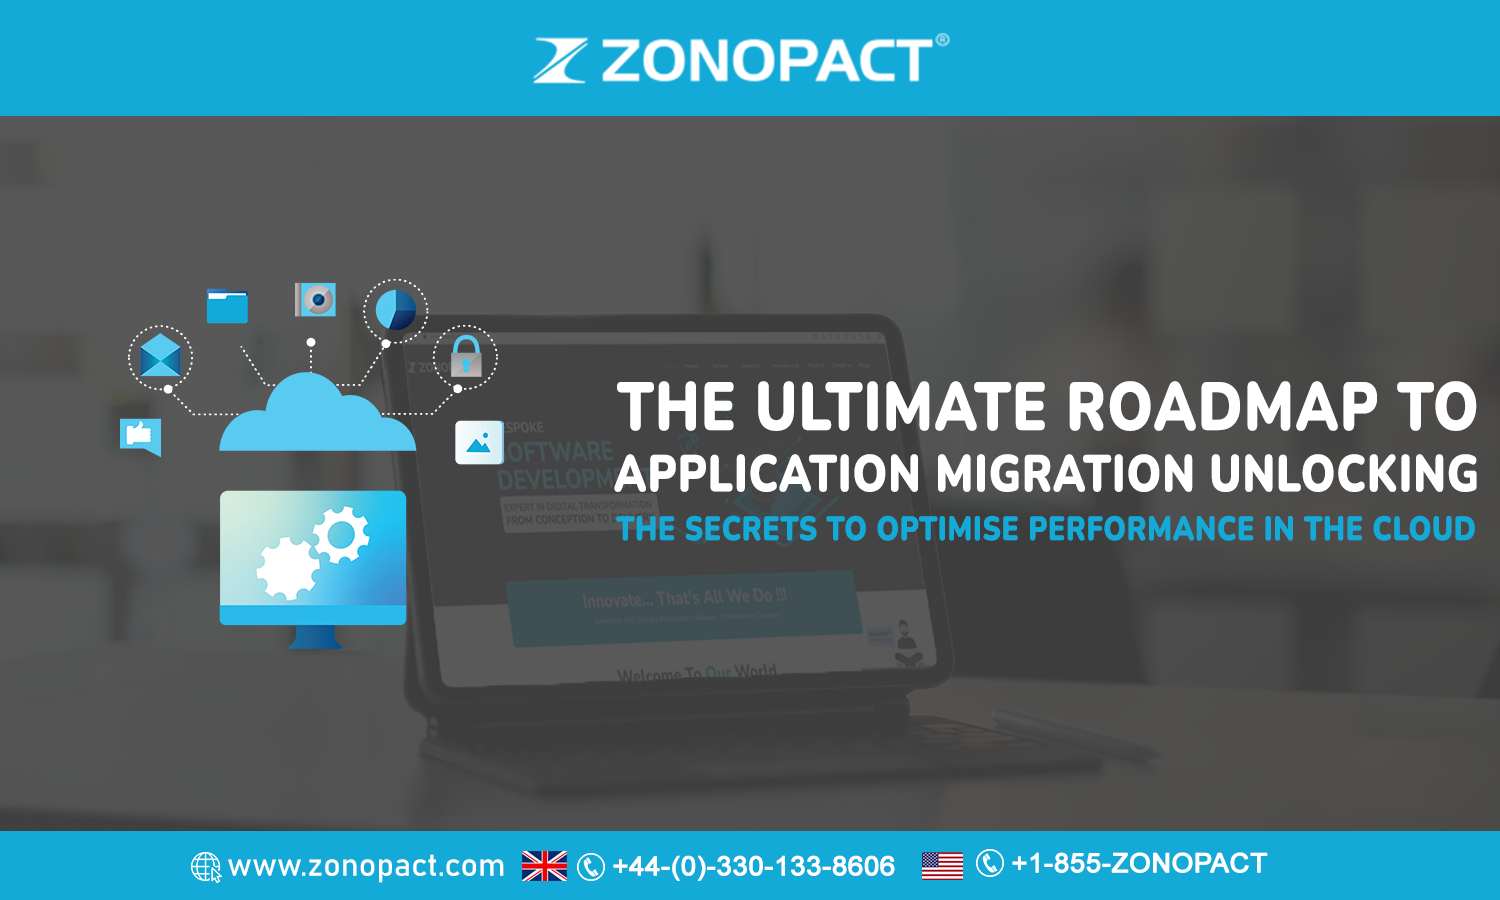 The Ultimate Roadmap to Application Migration Unlocking the Secrets to Optimise Performance in the Cloud (1)